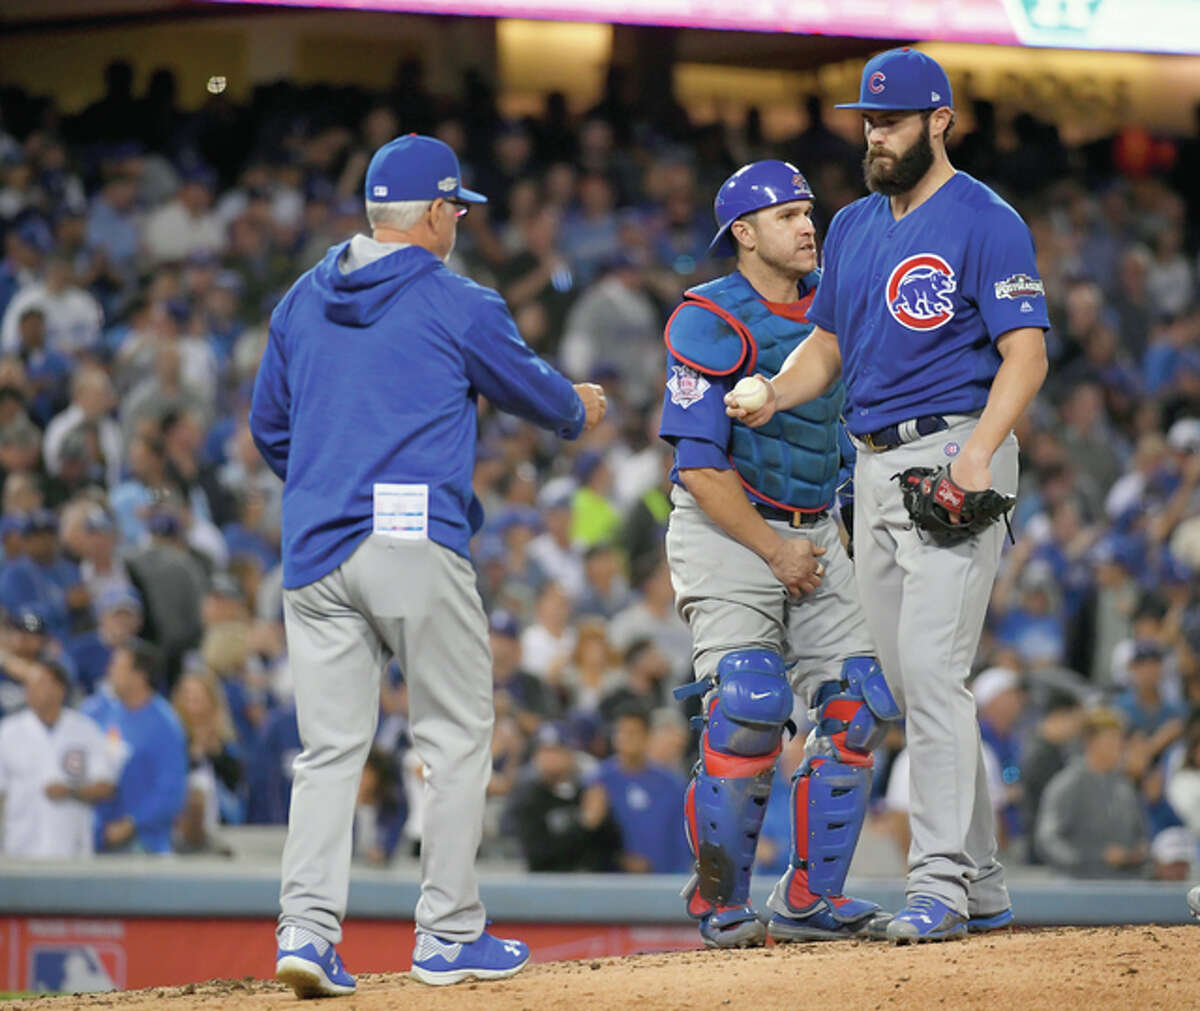 Chicago Cubs manager Joe Maddon takes starter Jake Arrieta out of the game during the sixth inning of Game 3 of the National League Championship Series against the Dodgers Tuesday night in Los Angeles.